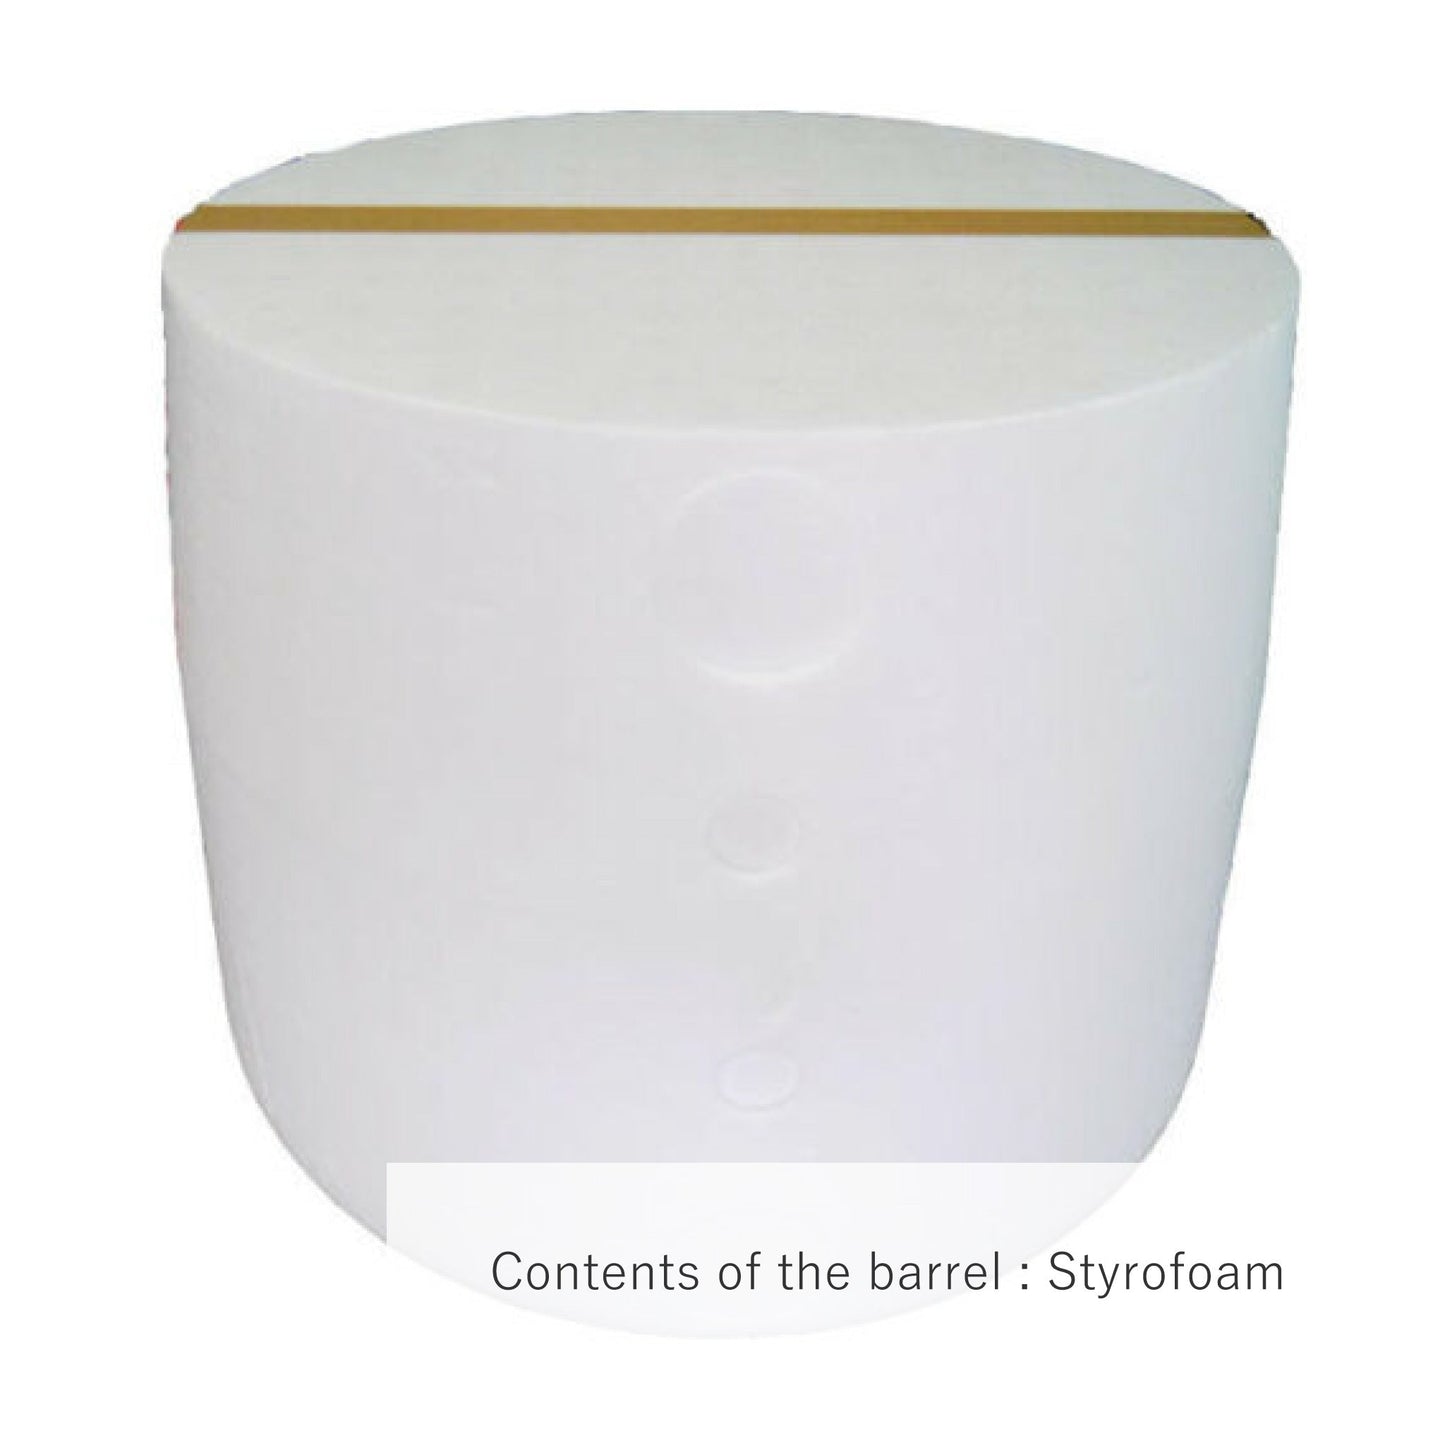 Decorative barrels for display Iwai-staggered pattern / Large size